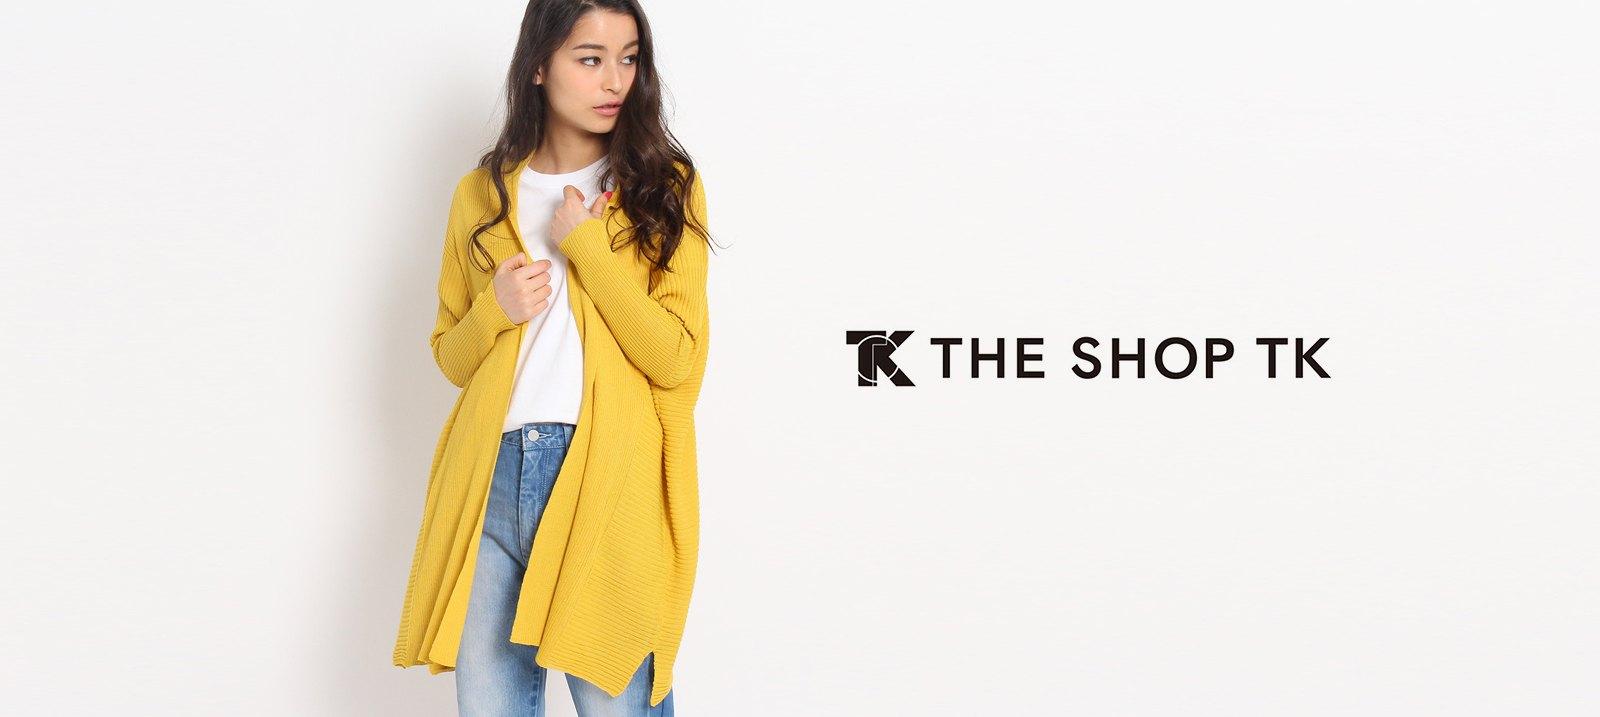 THE SHOP TK for women